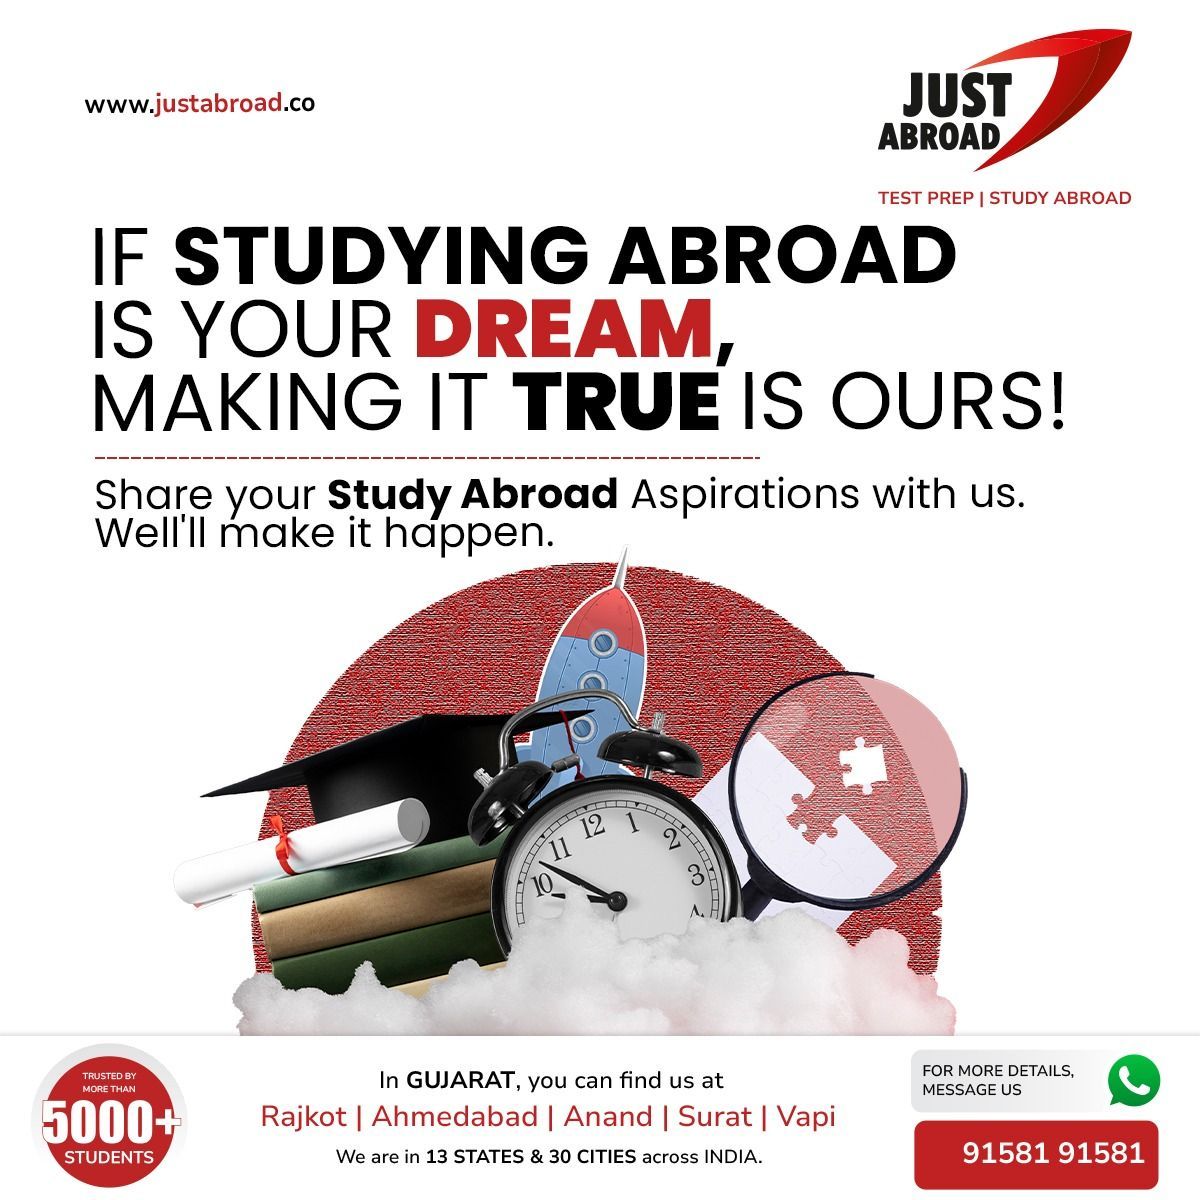 🌟 Dreaming of studying abroad? Let us help make it a reality! 🌍 From application to arrival, we're here to guide you every step of the way. Your dream is our mission. 

#JustAbroad #StudyAbroadDreams #GlobalEducation #DreamBig #MakeItHappen #EducationGoals